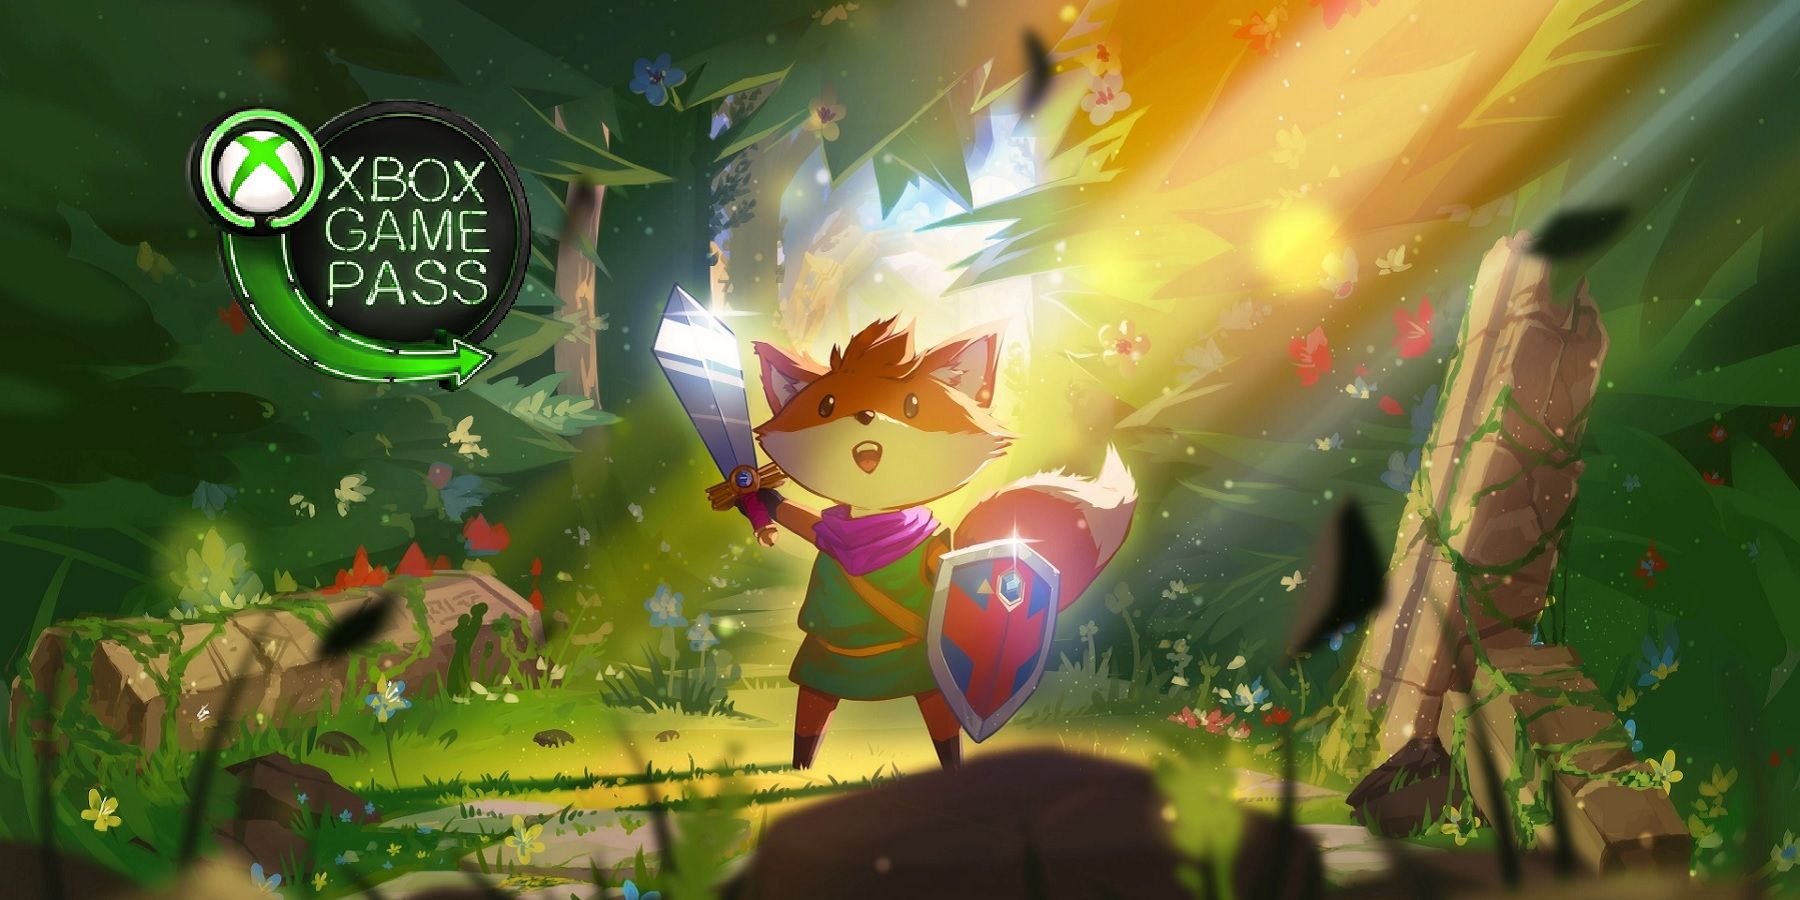 Xbox Game Pass Adds 4 New Games, Including 3 Day One Releases